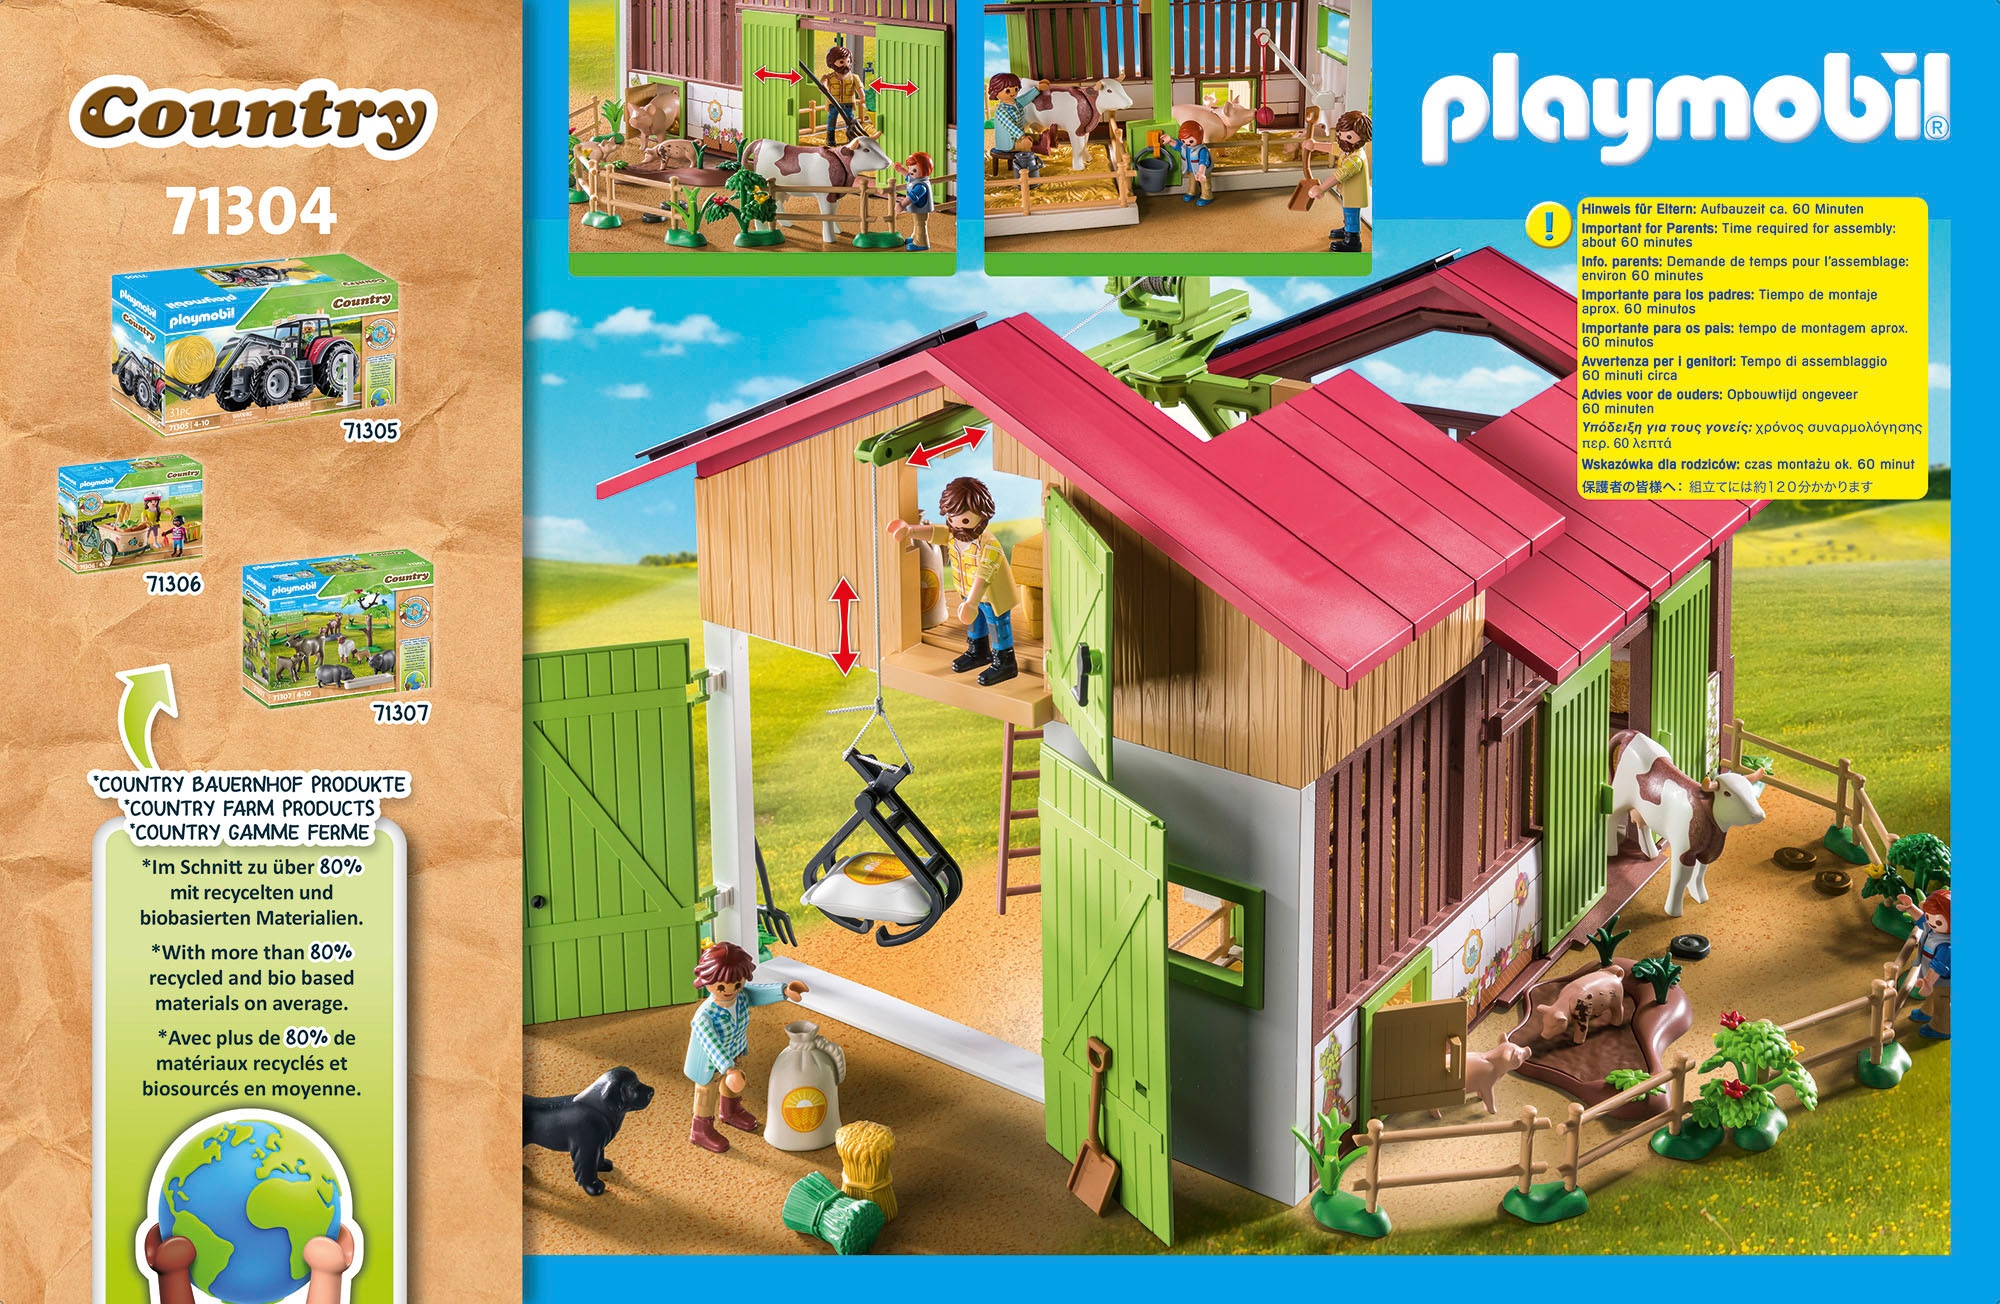 Playmobil® Konstruktions-Spielset »Großer Bauernhof (71304), Country«, (182 St.), teilweise aus recyceltem Material; Made in Germany